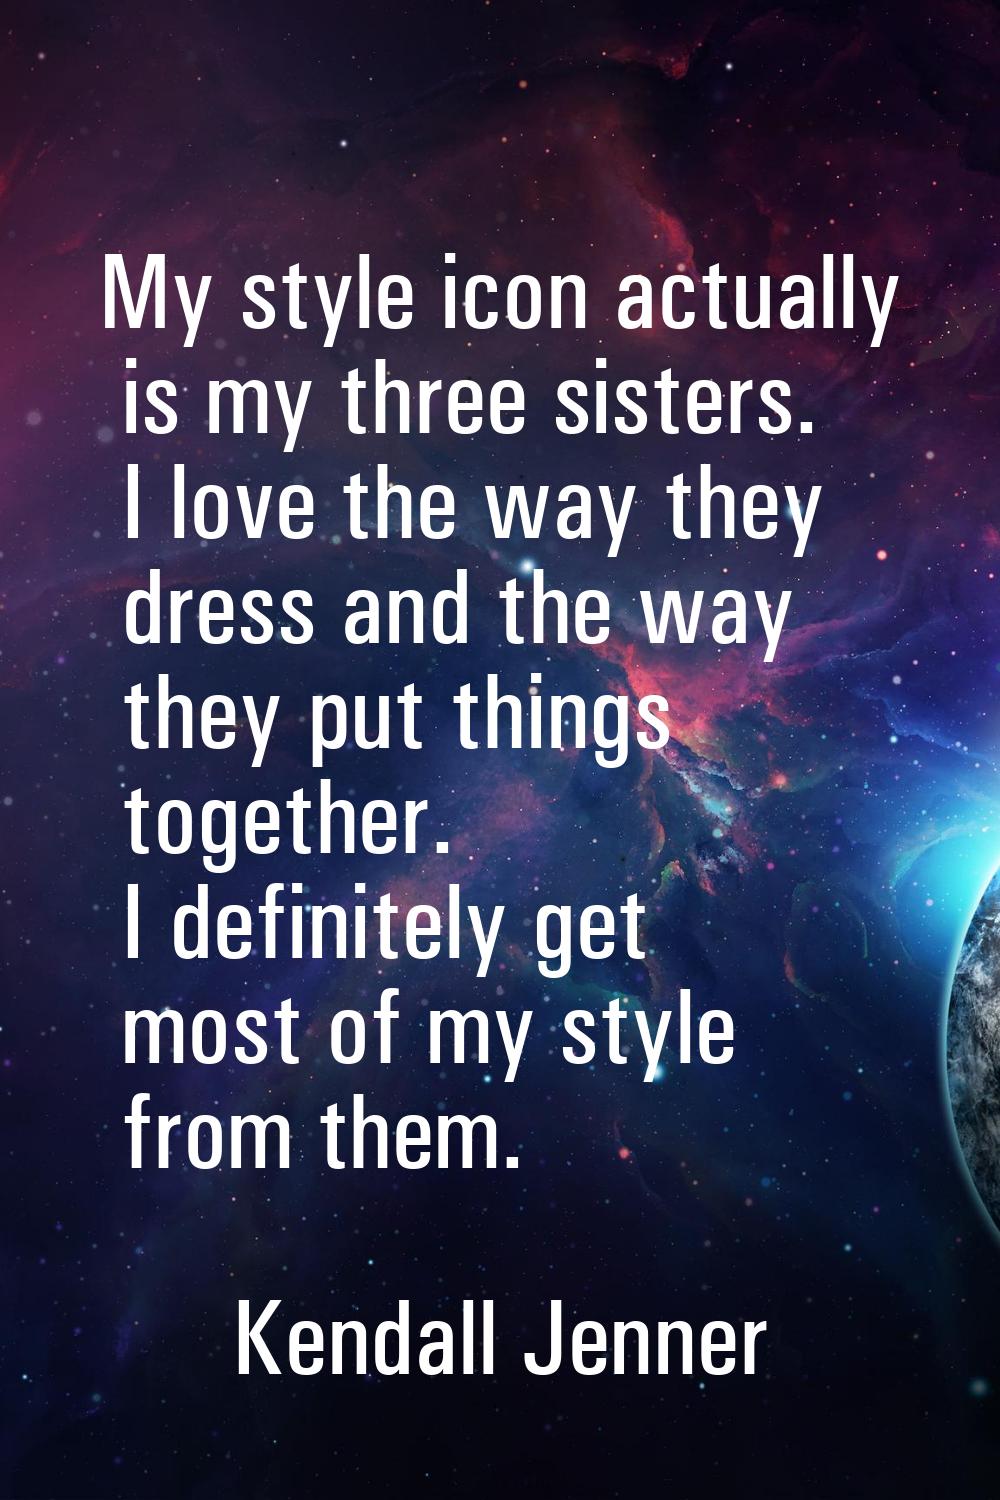 My style icon actually is my three sisters. I love the way they dress and the way they put things t